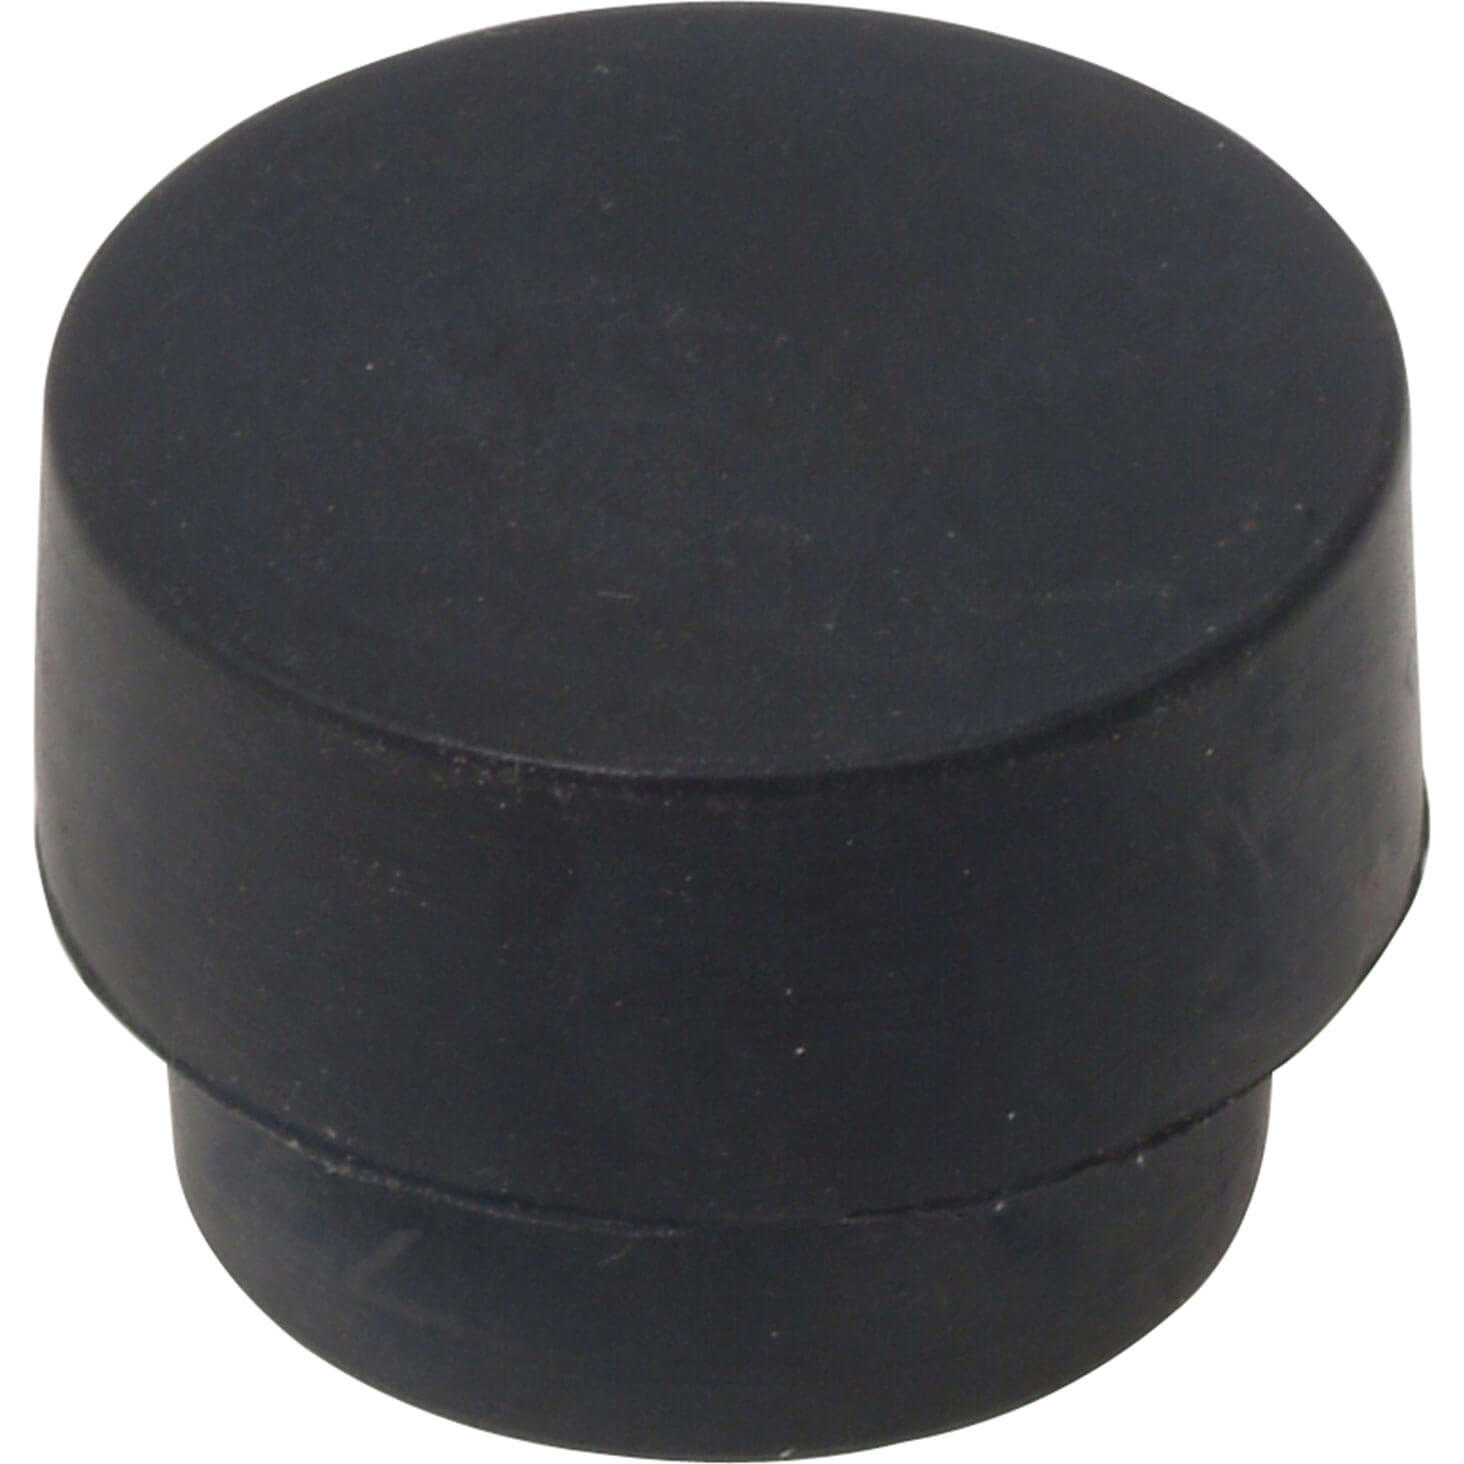 Thor 612Hf Hard Rubber Face For J612